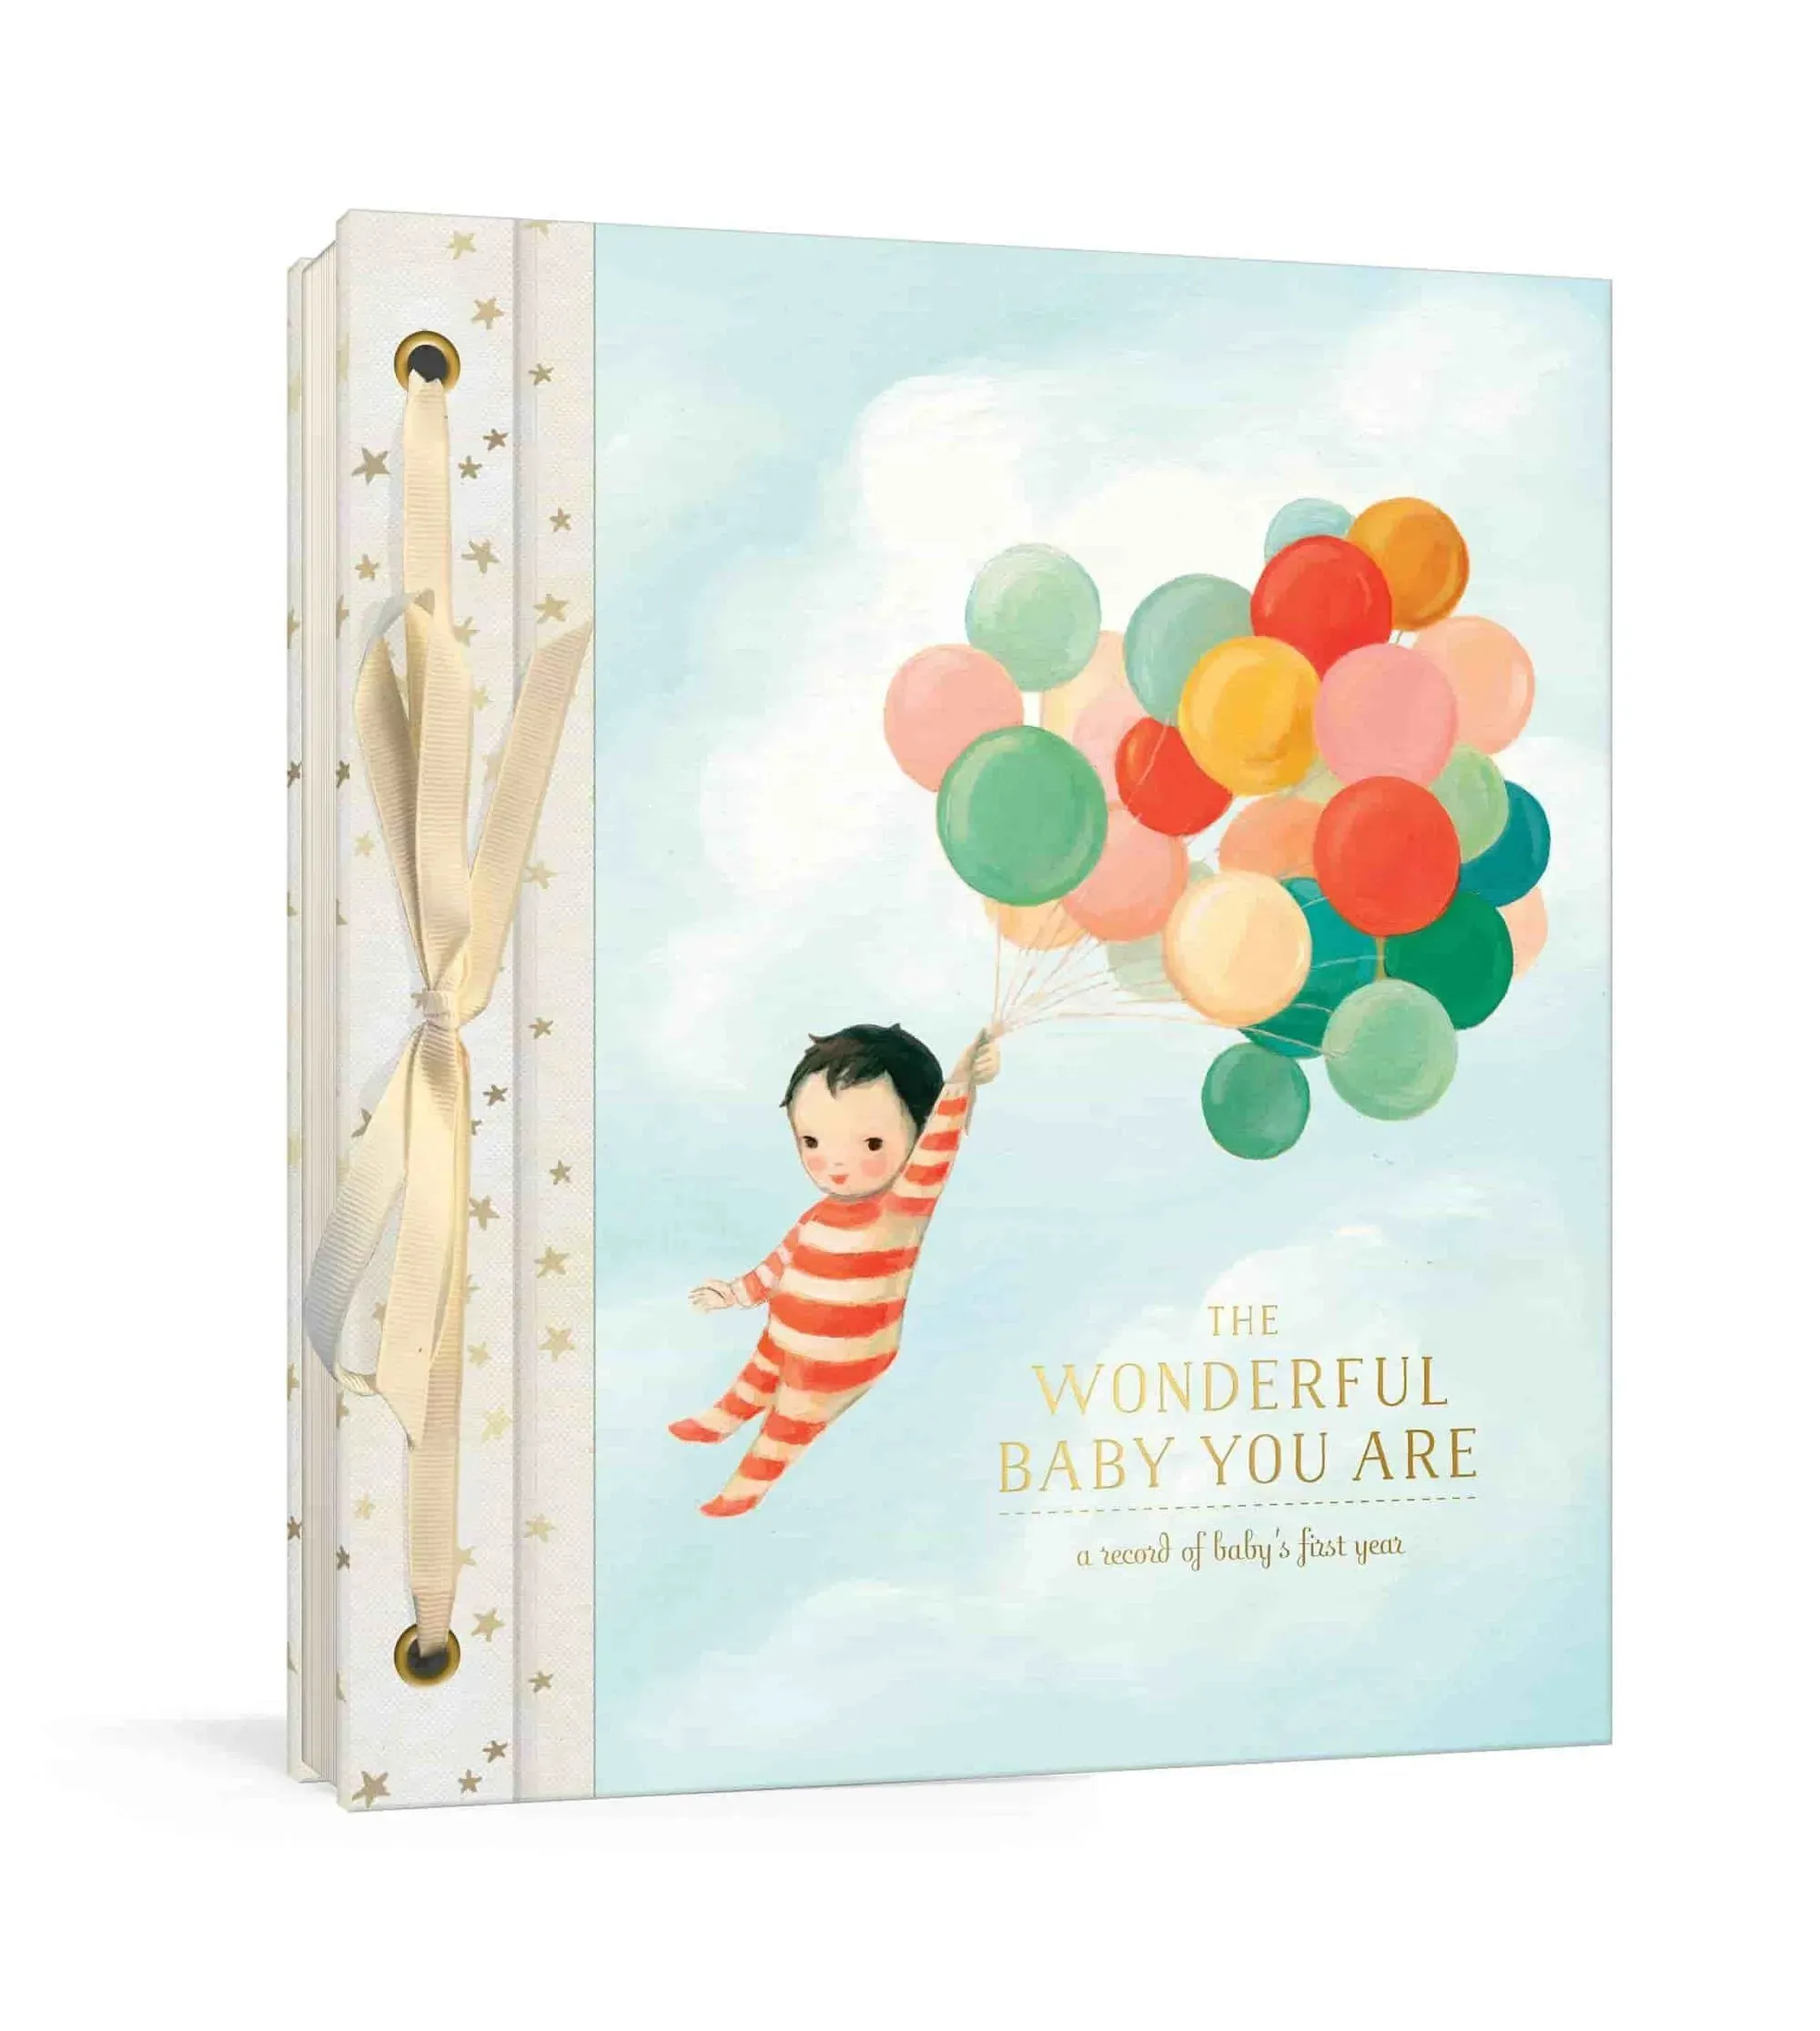 The Wonderful Baby You Are: A Record of Baby’s First Year by Emily Winfield Martin‍